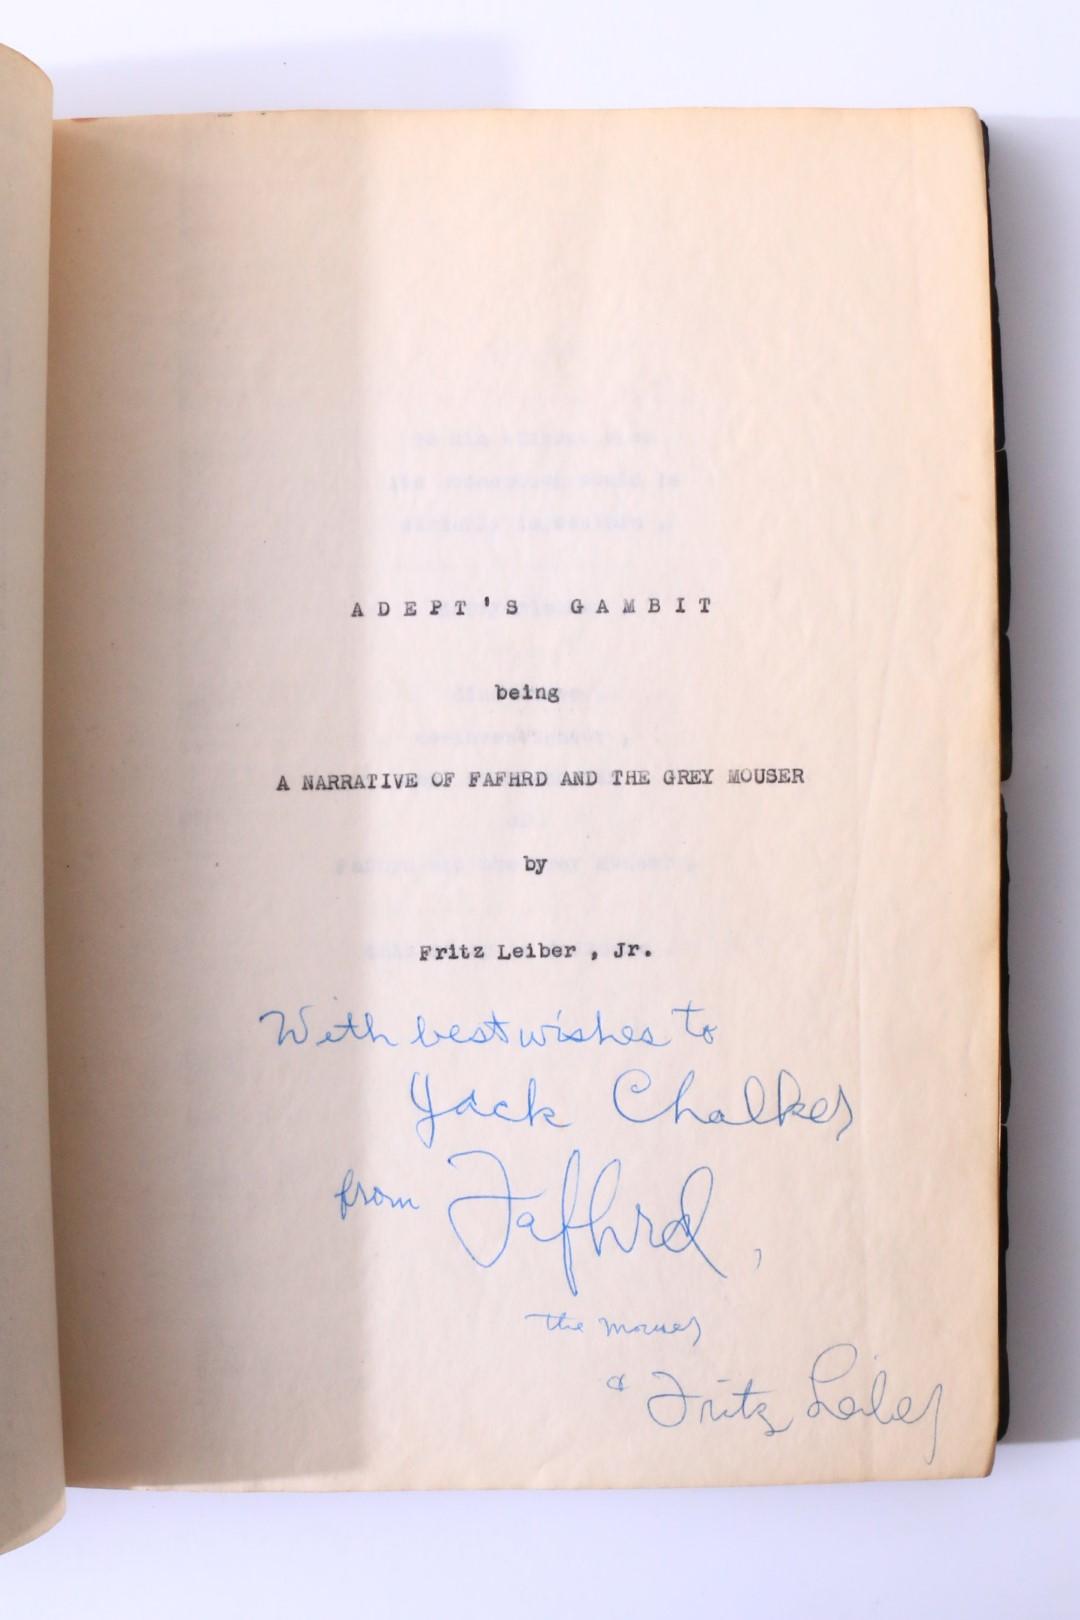 Fritz Leiber - A Collection of Fafhrd and Gray Mouser Autograph Manuscripts and Typescripts - None, , Manuscript. Signed